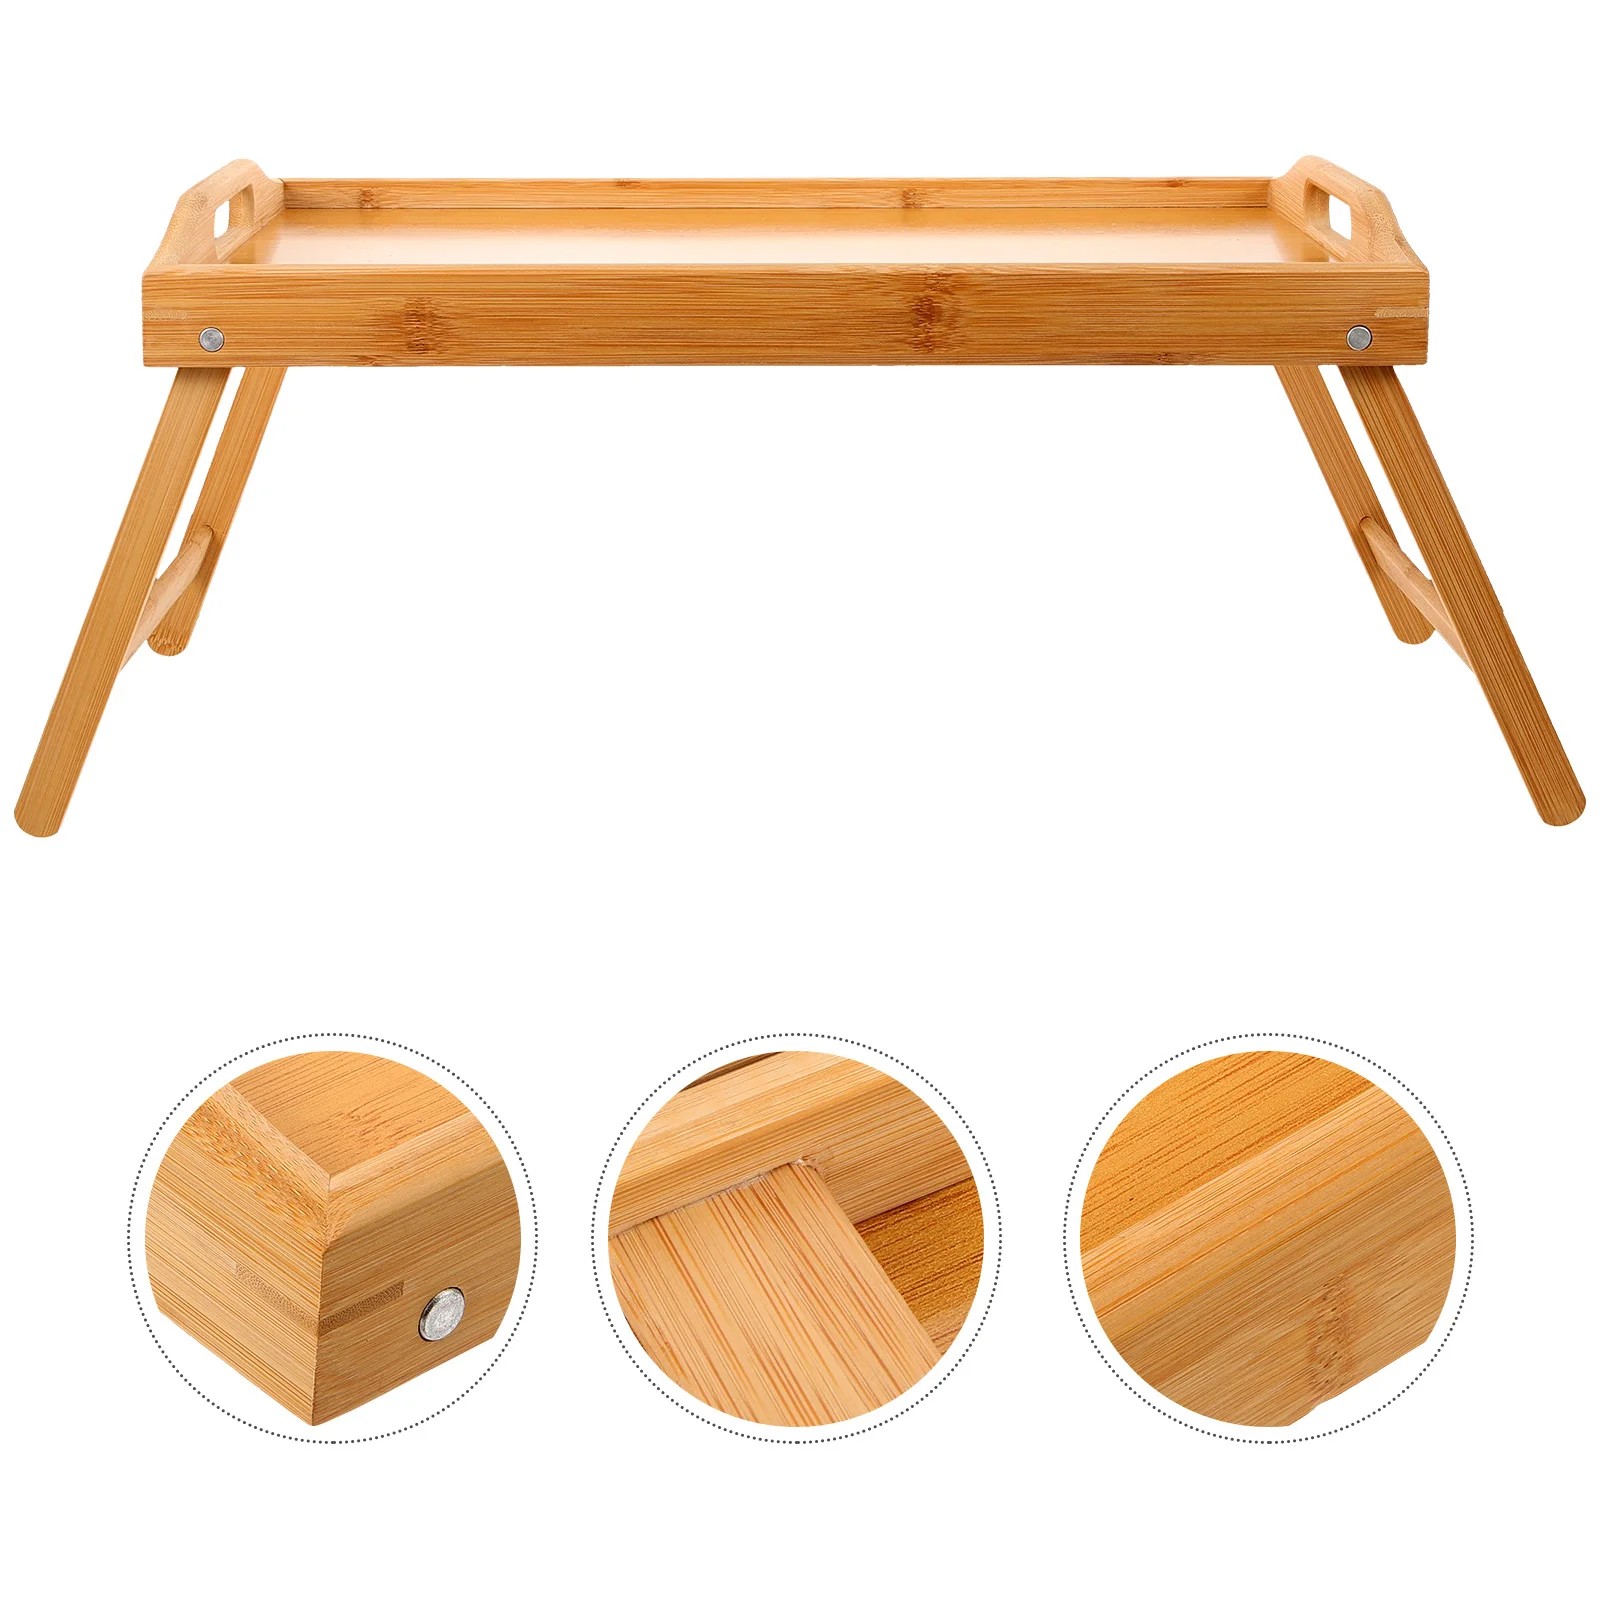 

Mini Wooden Table Rectangular Folding Bed Table Small Bed Desk Portable Side Table Breakfast Serving Tray Coffee Table Home